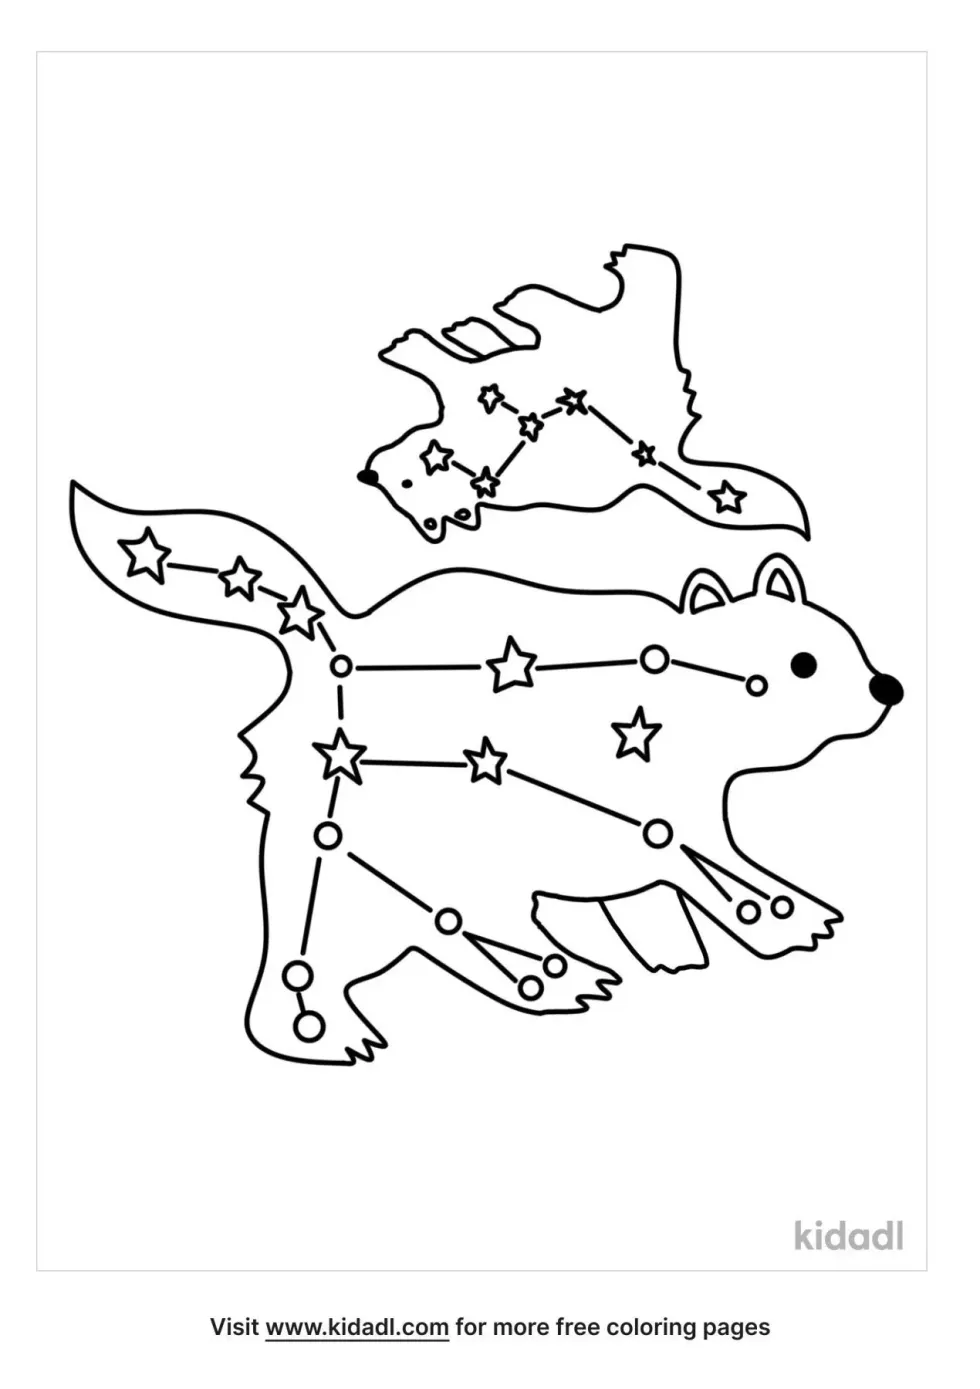 Ursa Major And Minor Constellations Coloring Page